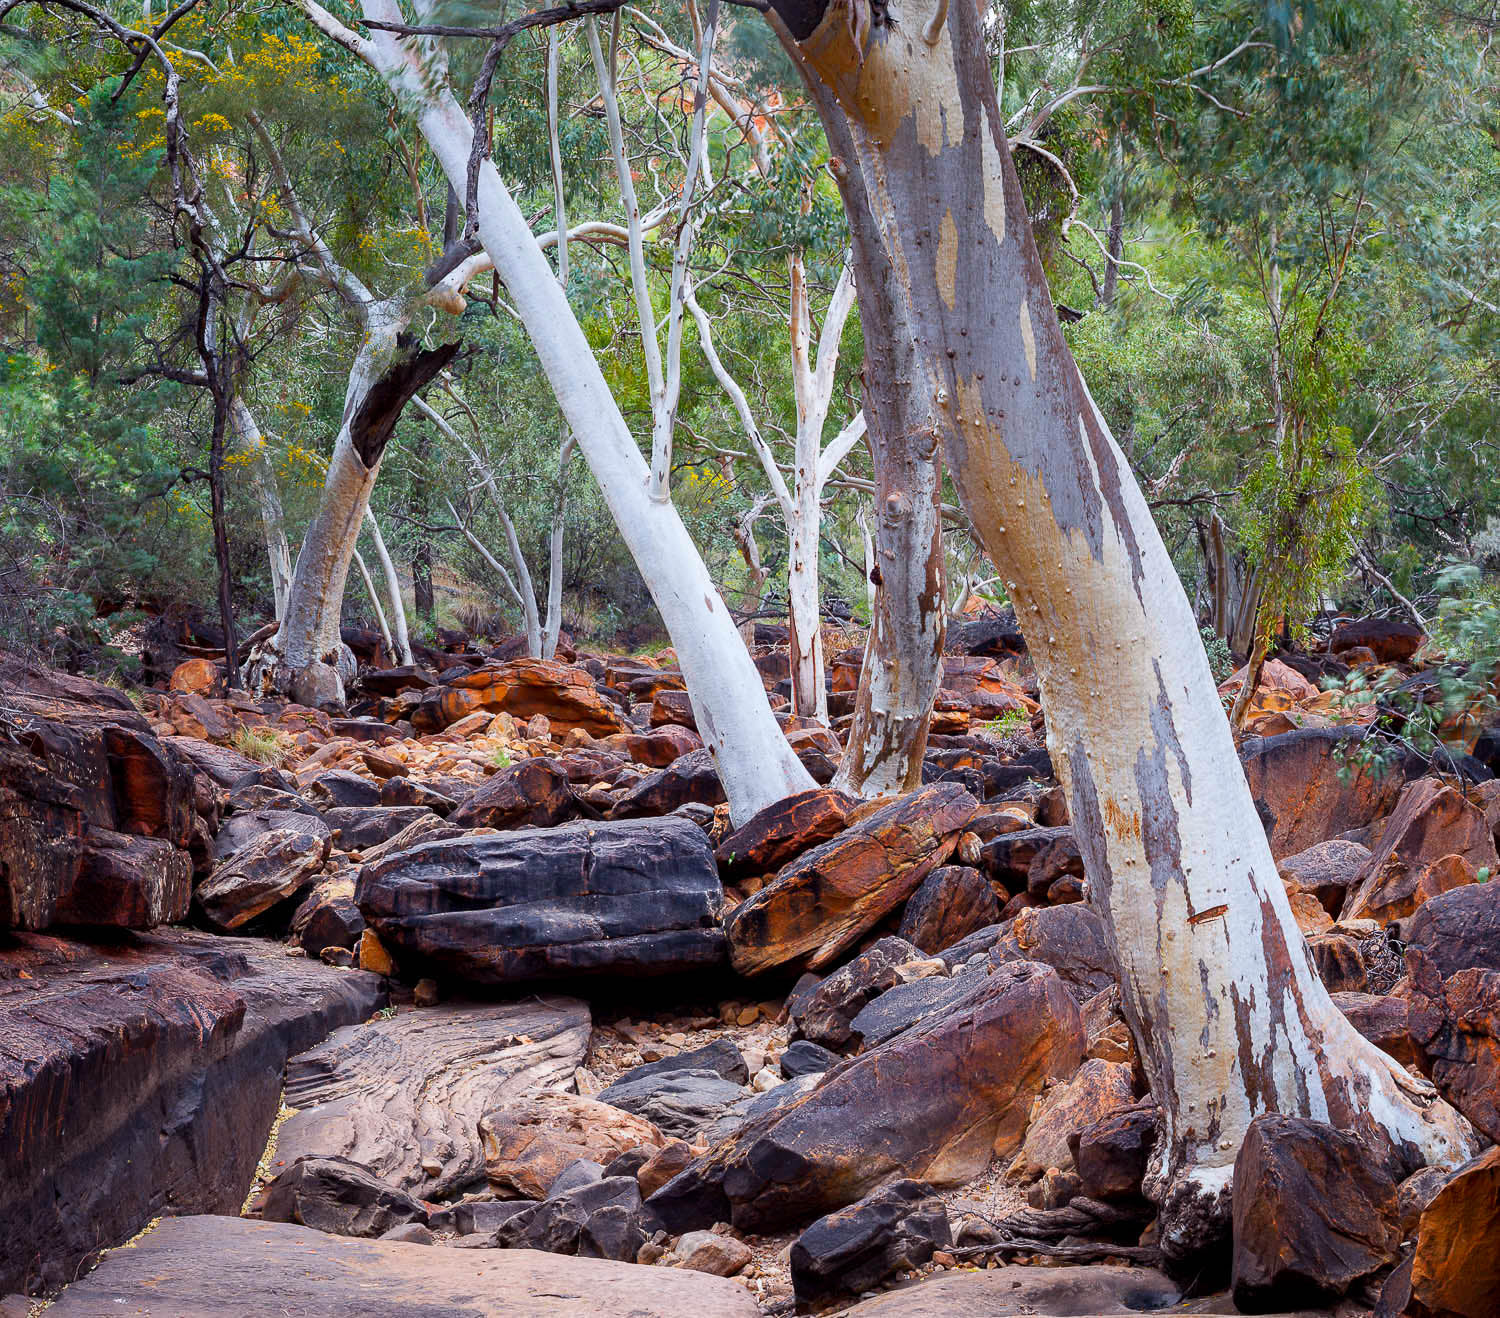 Gum trees' stems in a forest with a lot of plants in the background, Kings Canyon Gums, Watarrka National Park - Northern Territory